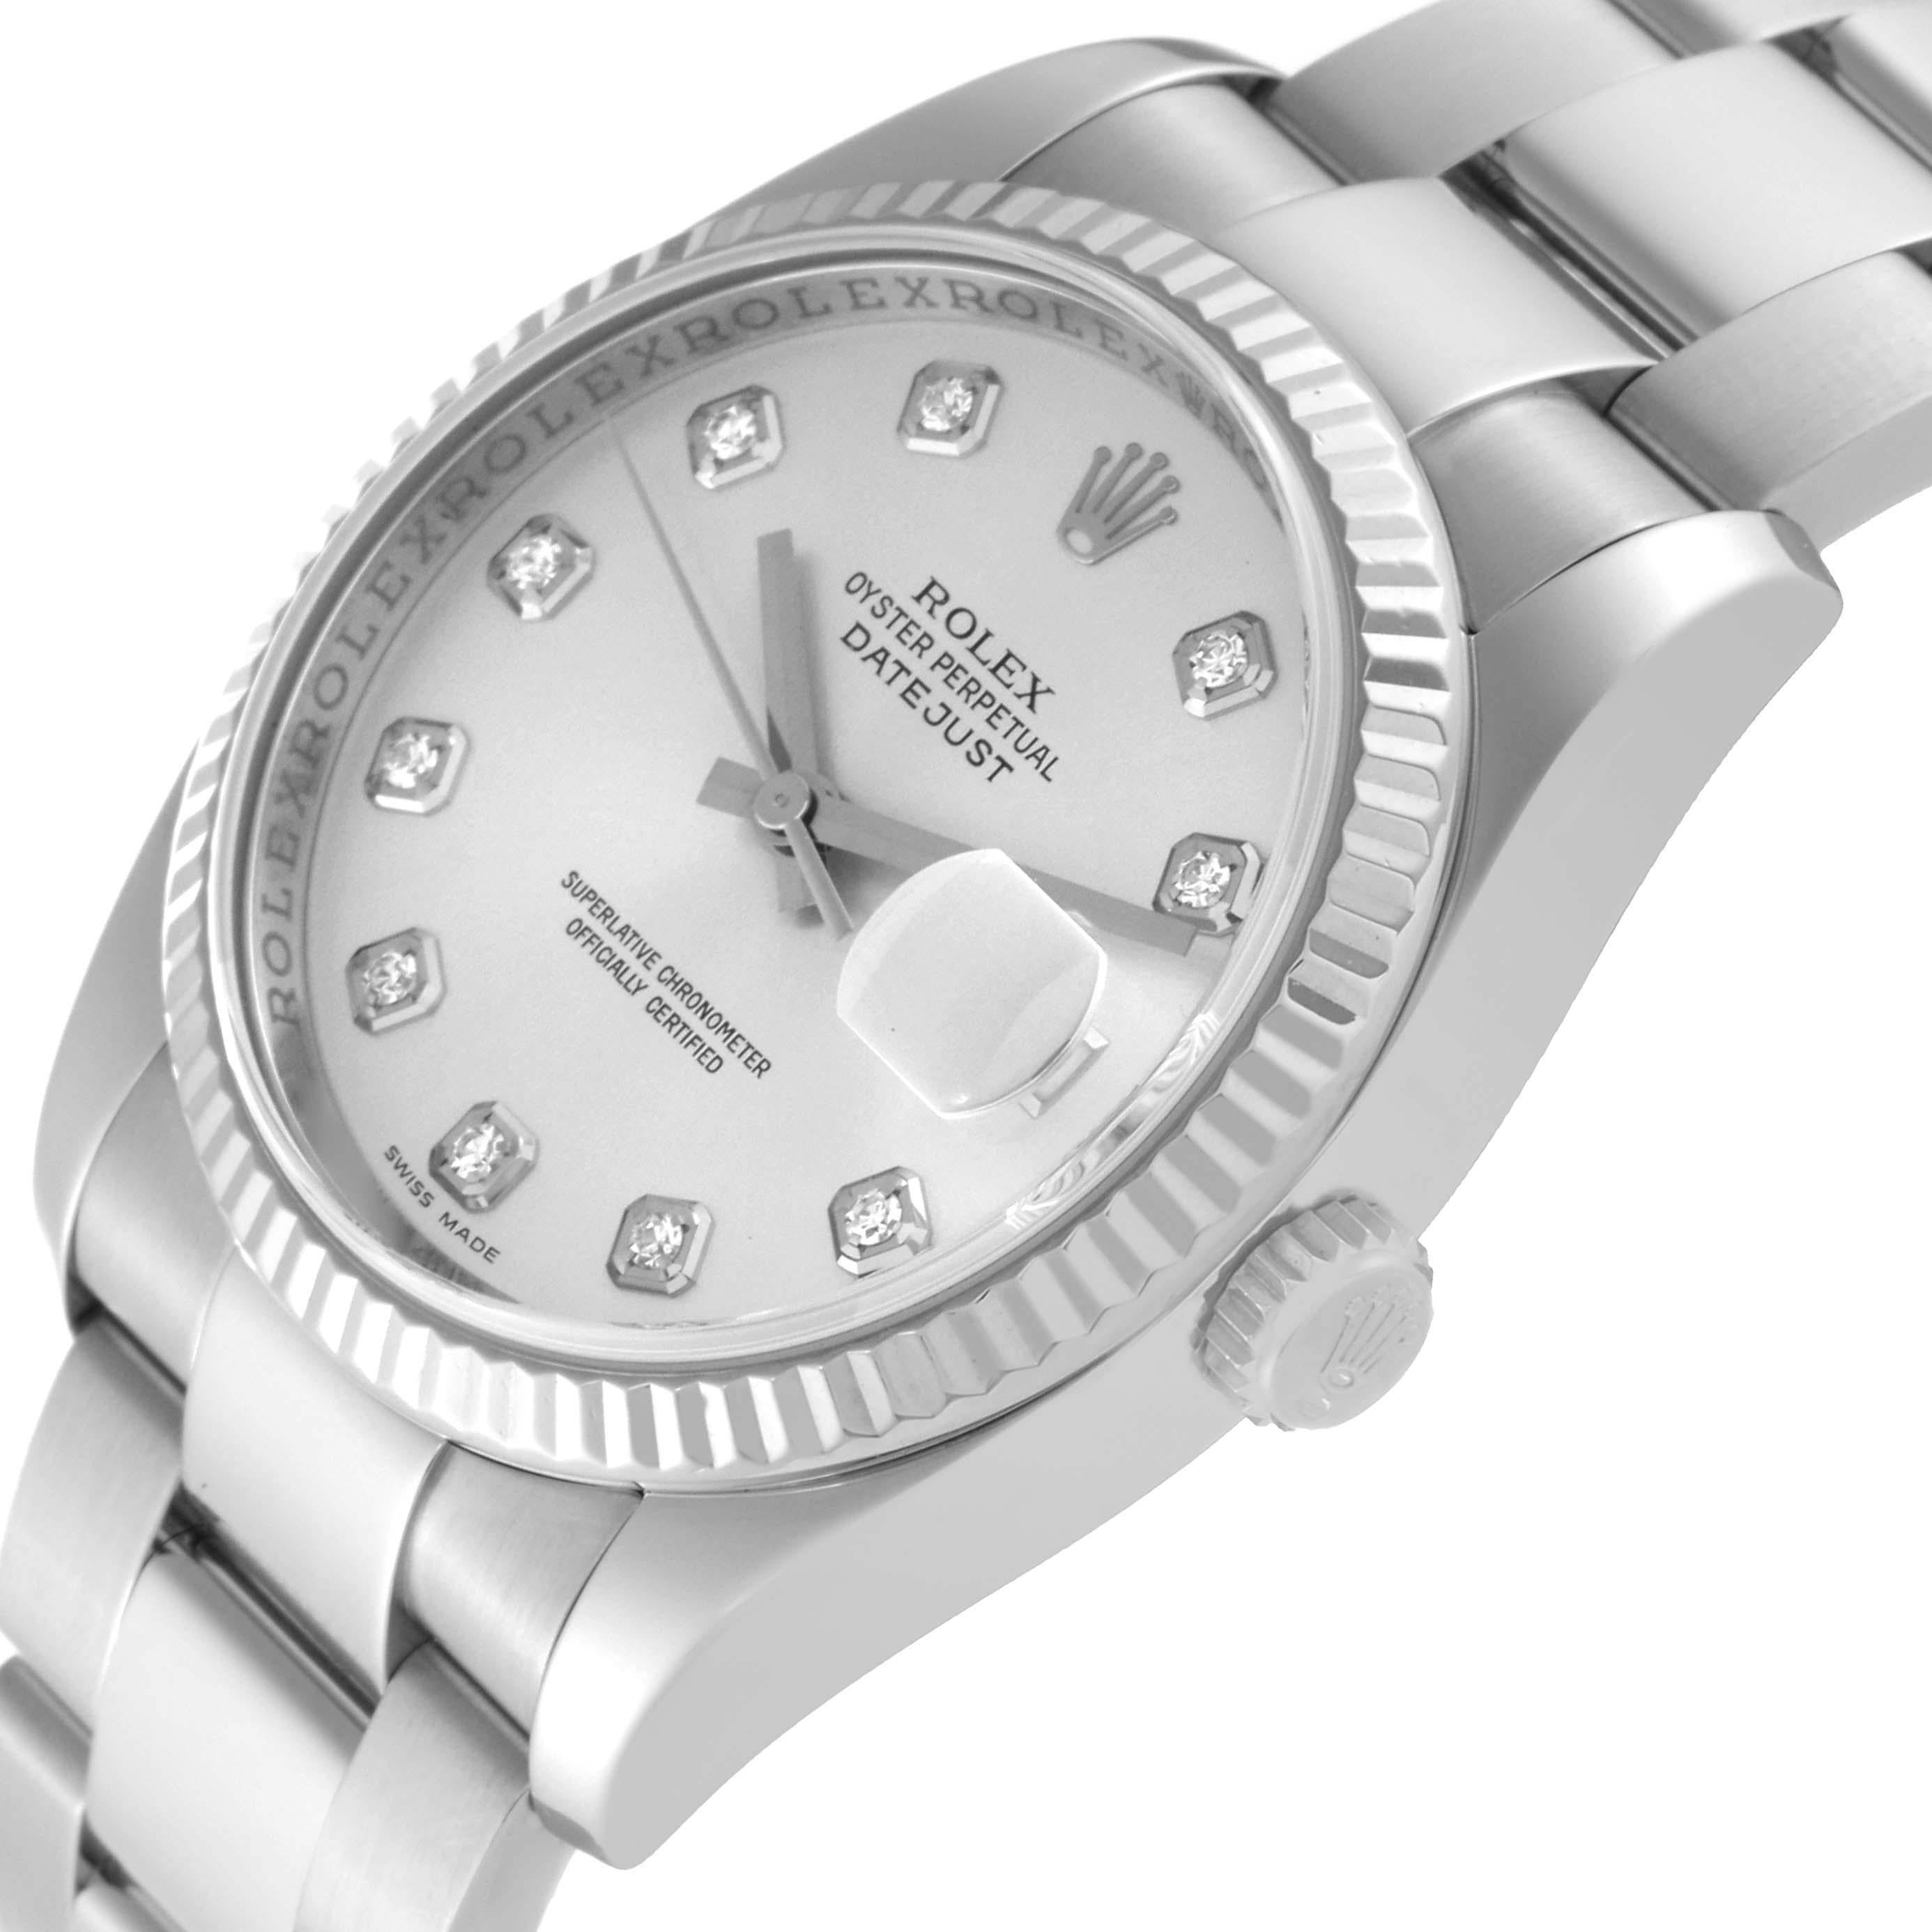 Rolex Datejust Steel White Gold Silver Diamond Dial Mens Watch 116234 Papers In Excellent Condition For Sale In Atlanta, GA